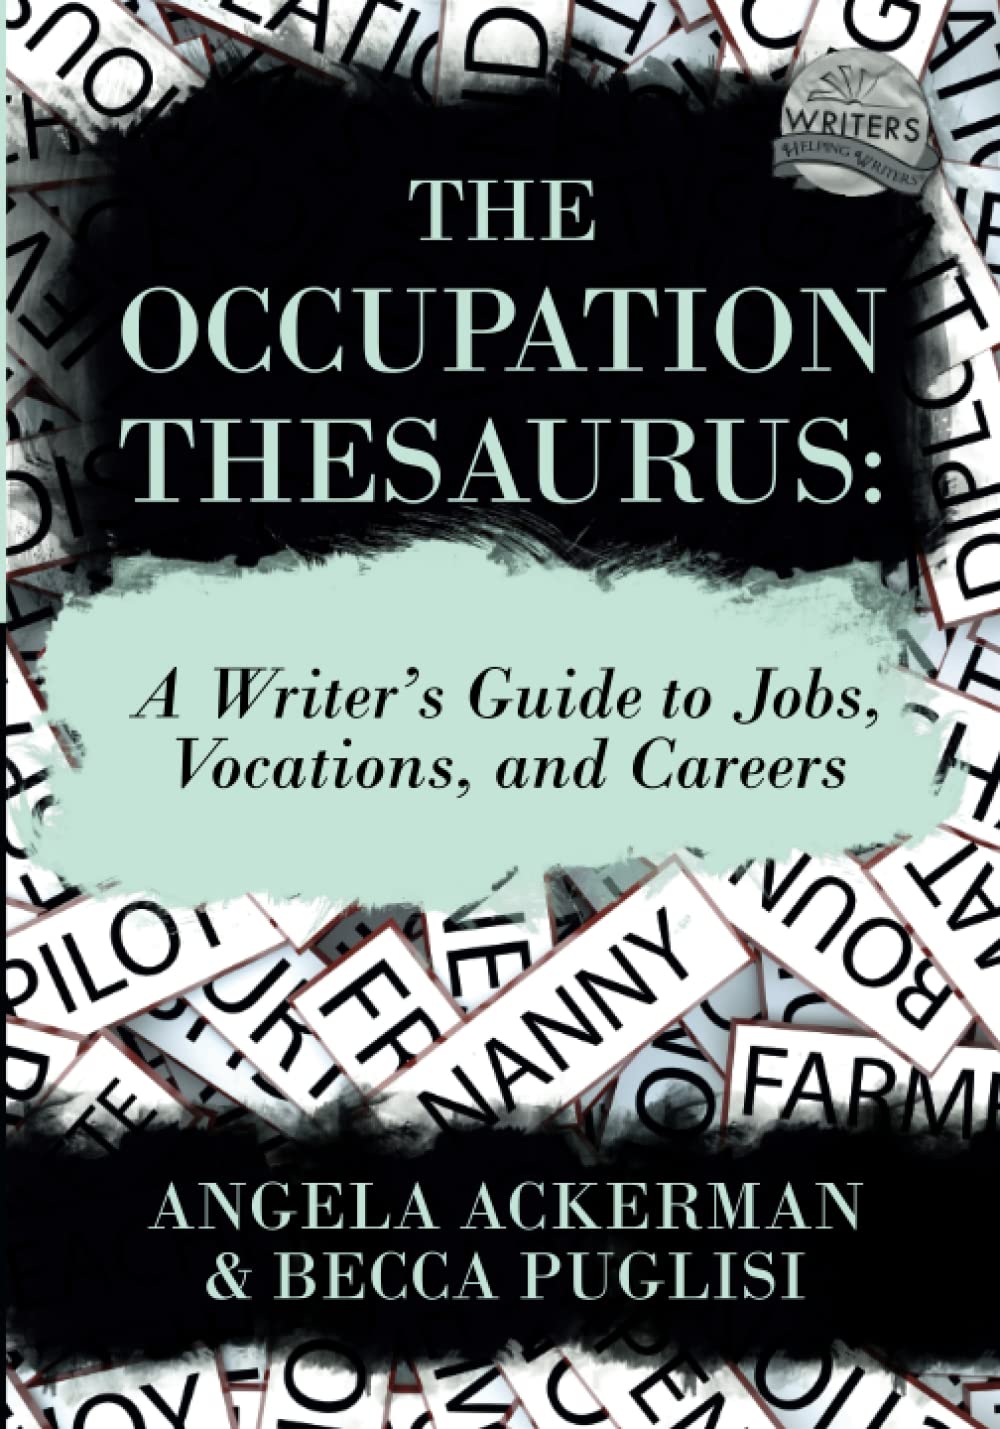 The Occupation Thesaurus: A Writer’s Guide to Jobs, Vocations, and Careers